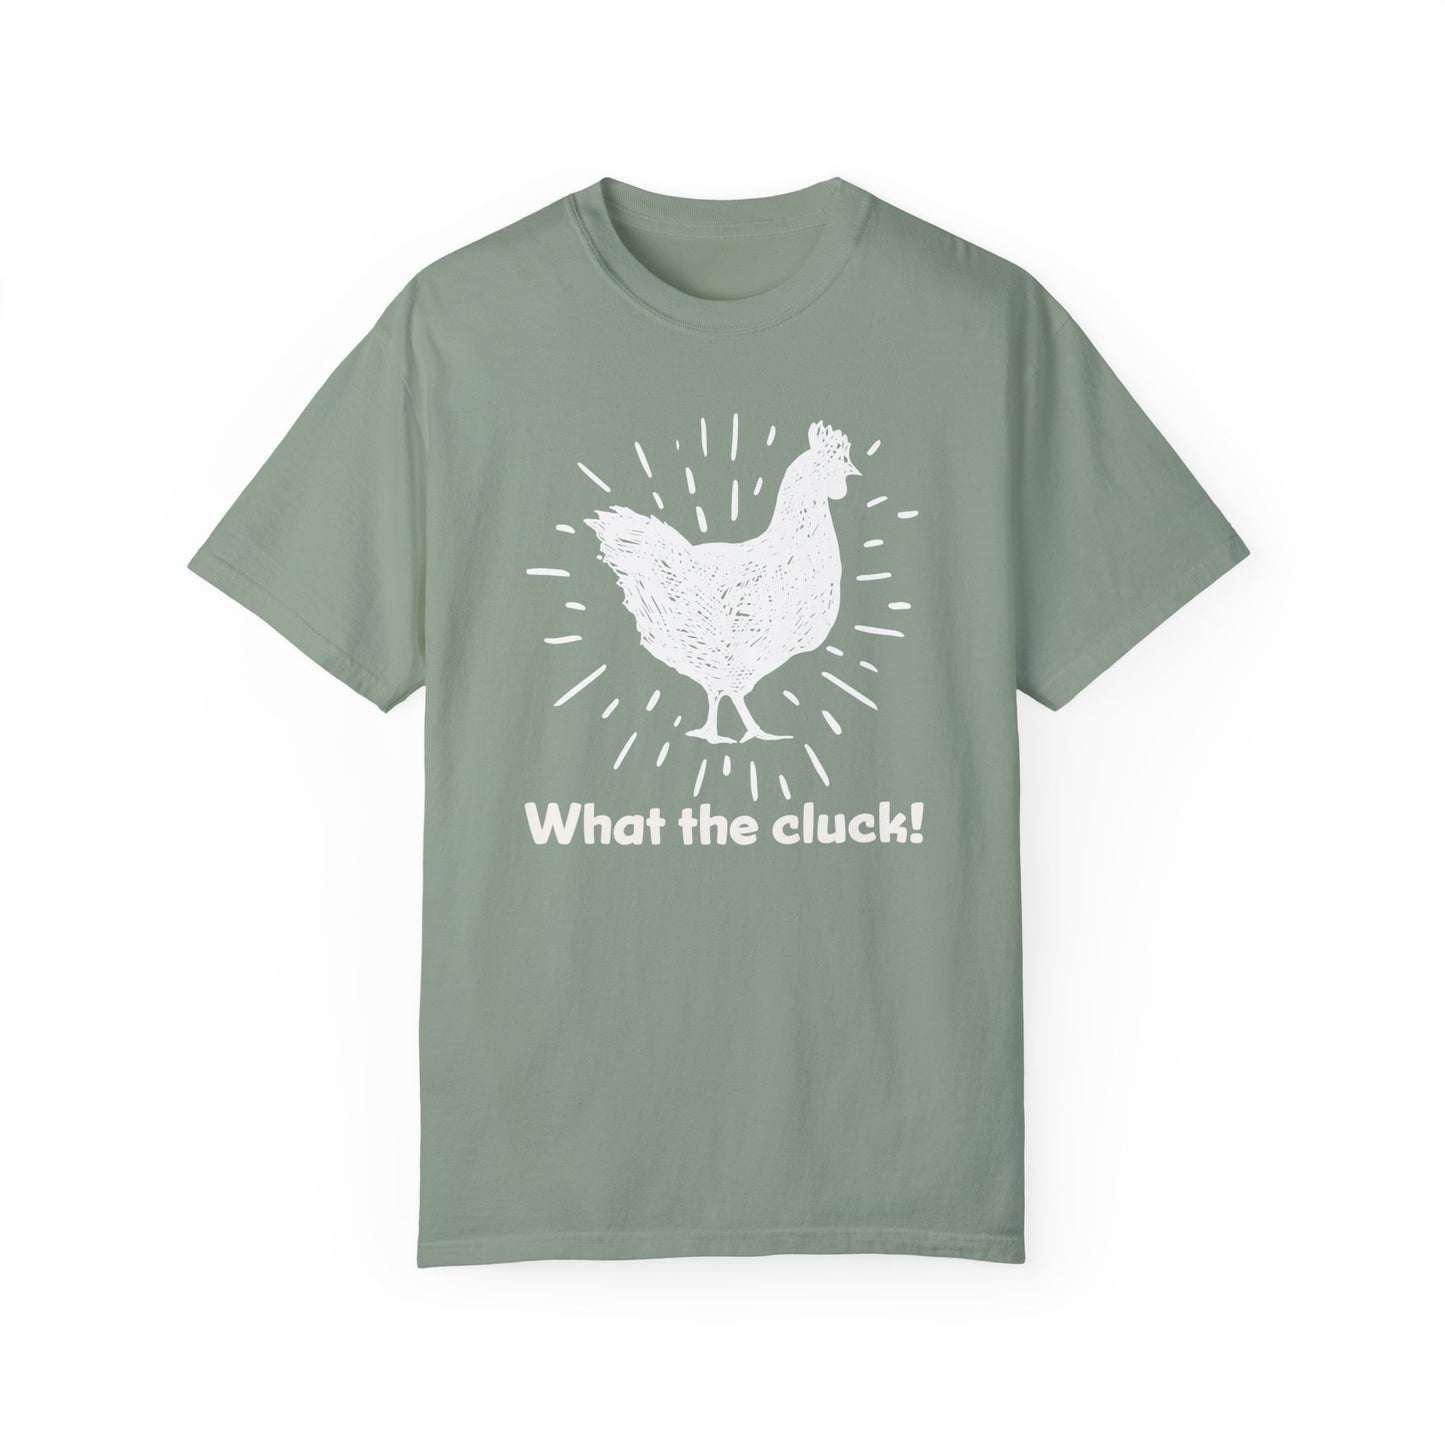 What the Cluck T-Shirt For Chicken T Shirt For Funny Hen TShirt For Barnyard Chic Tee